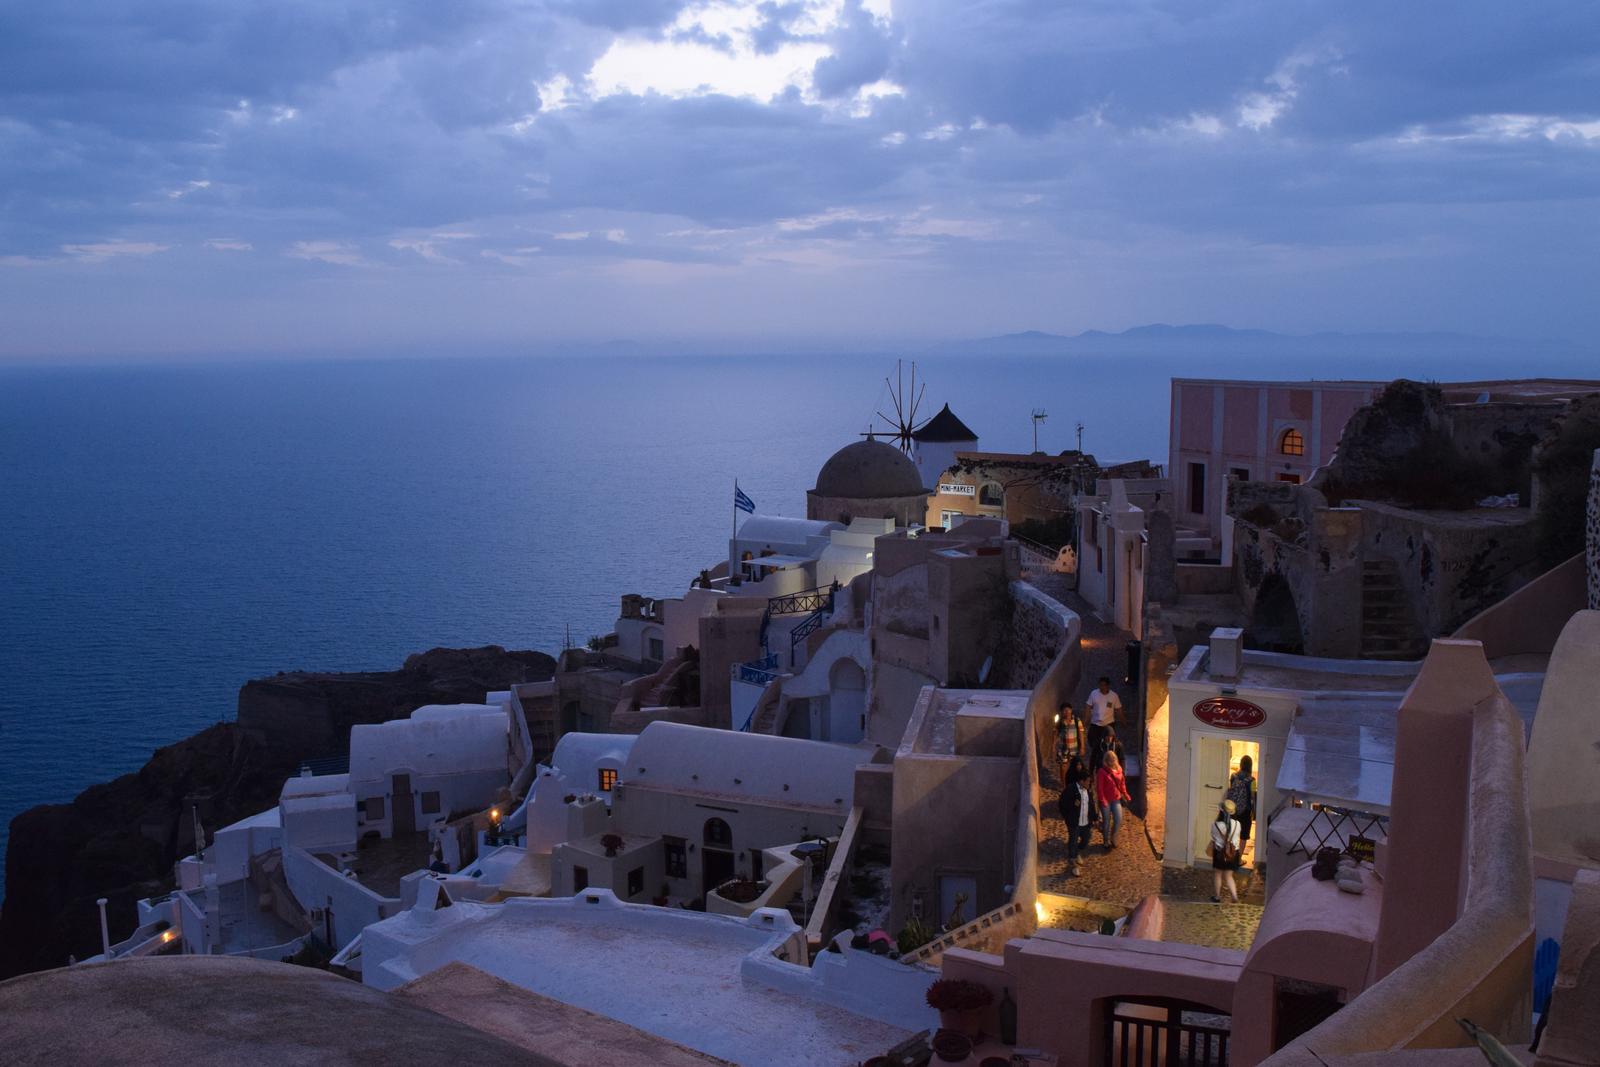 The Typical Shot of Oia